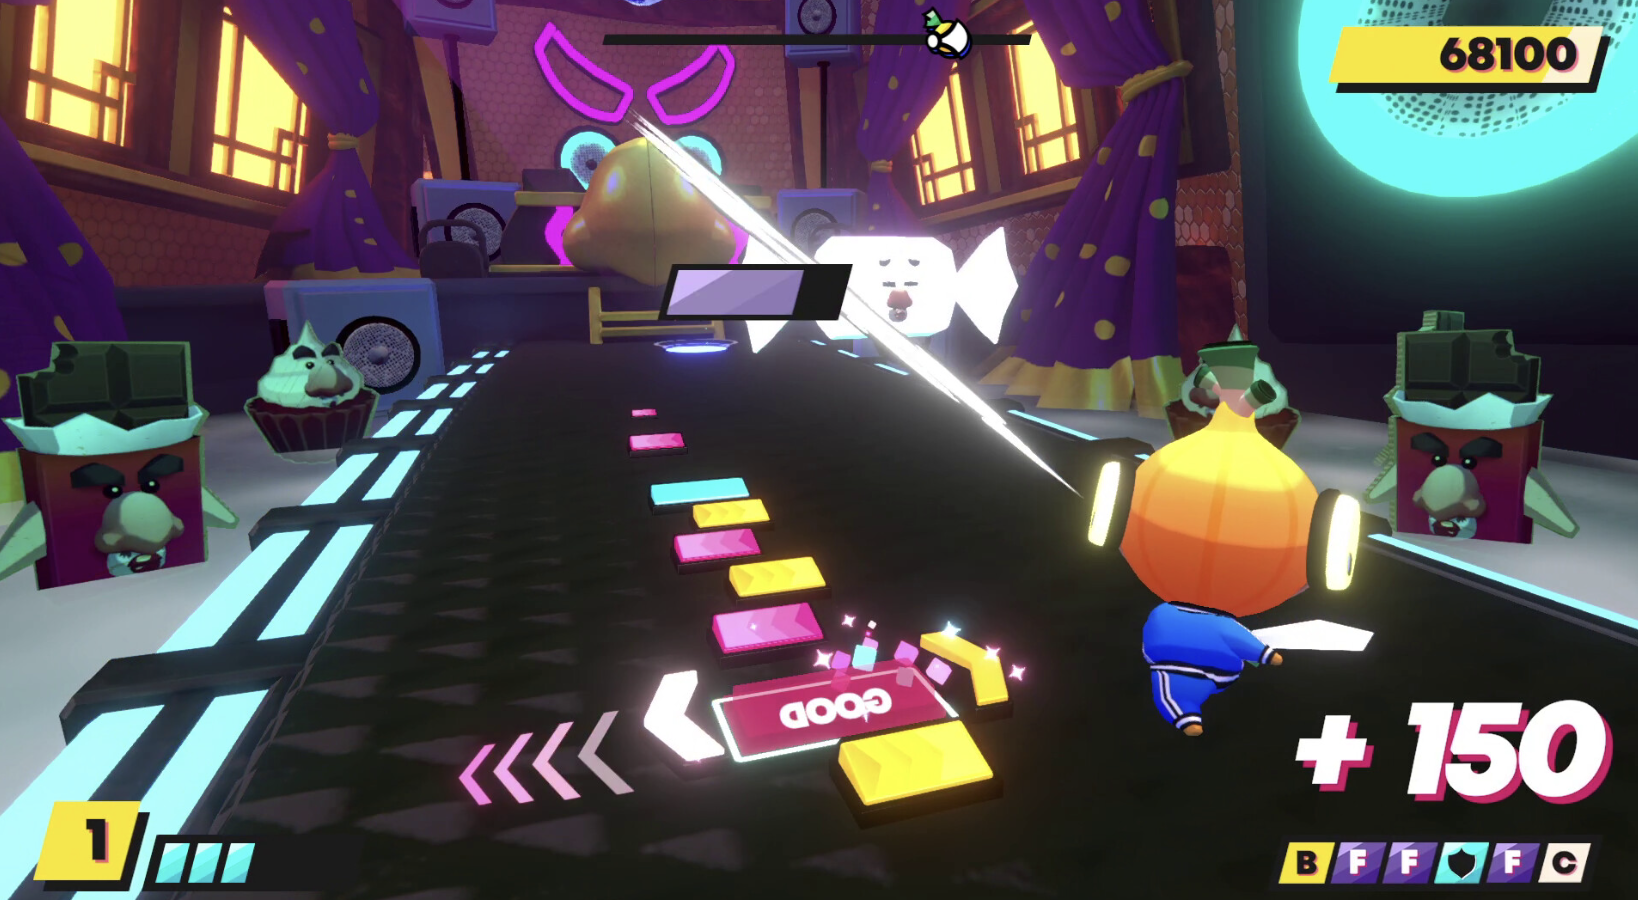 Rhythm Sprout review